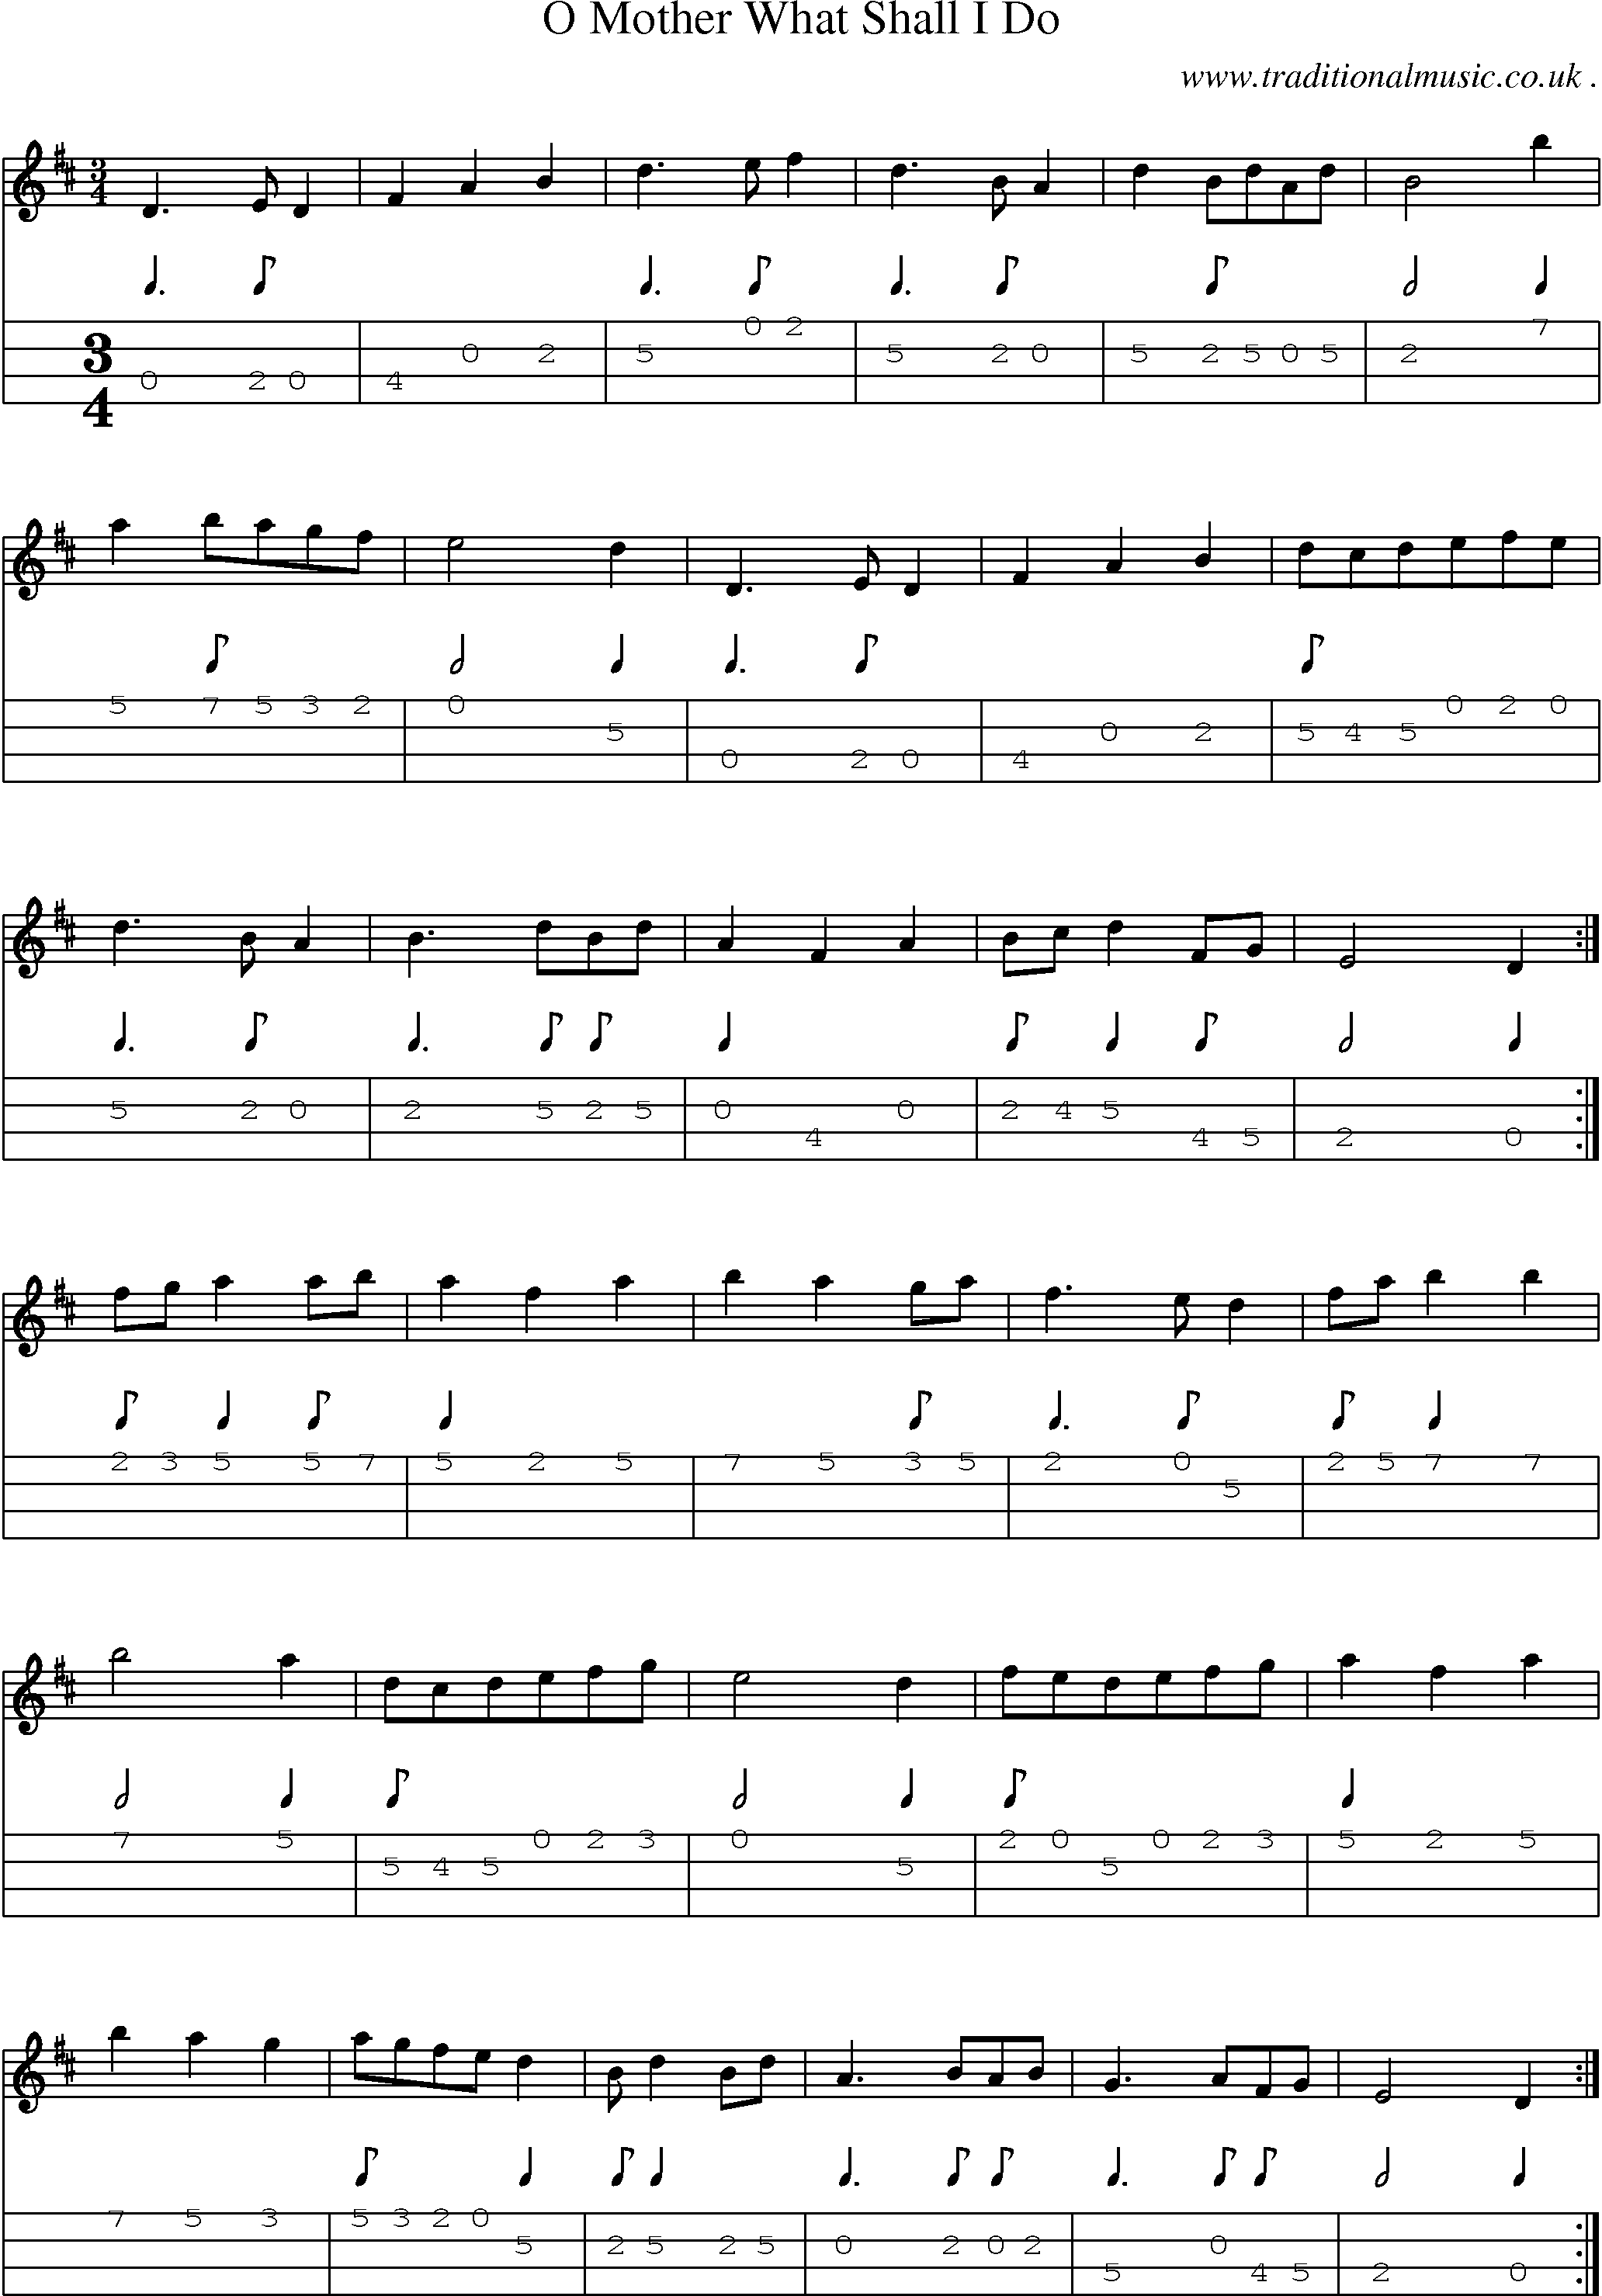 Sheet-music  score, Chords and Mandolin Tabs for O Mother What Shall I Do